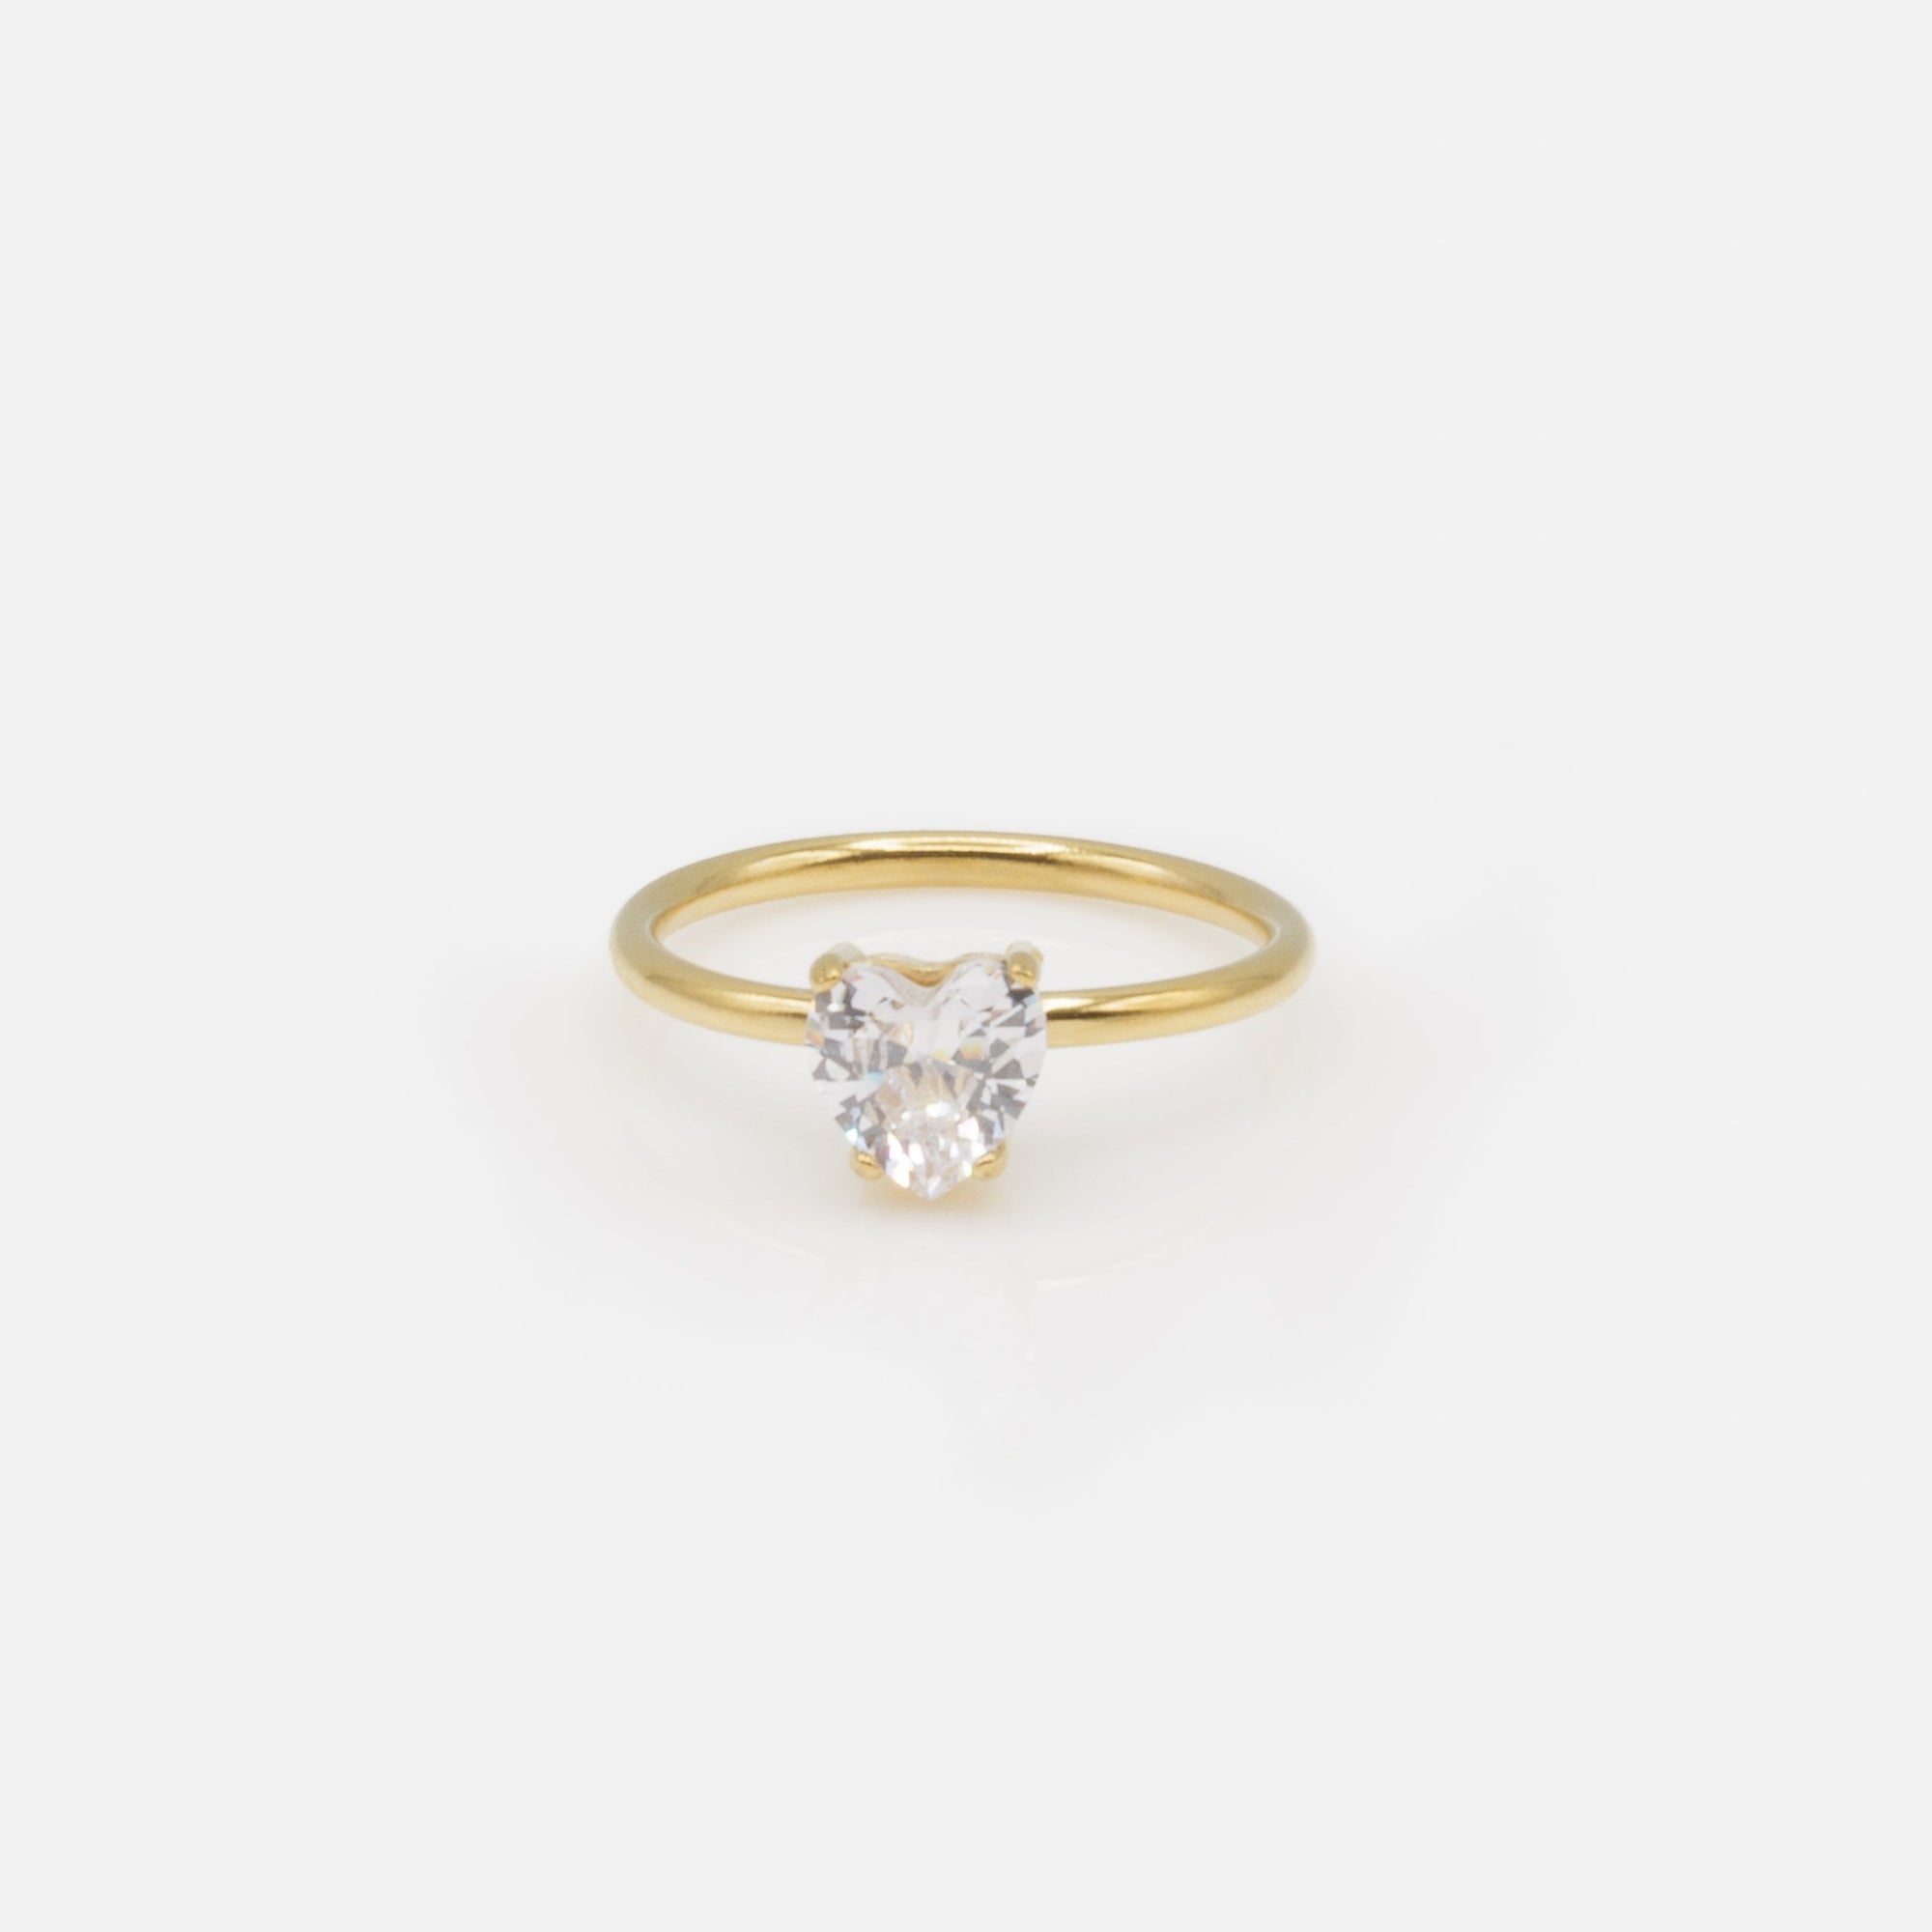 Gold ring with white heart cubic zirconia in stainless steel